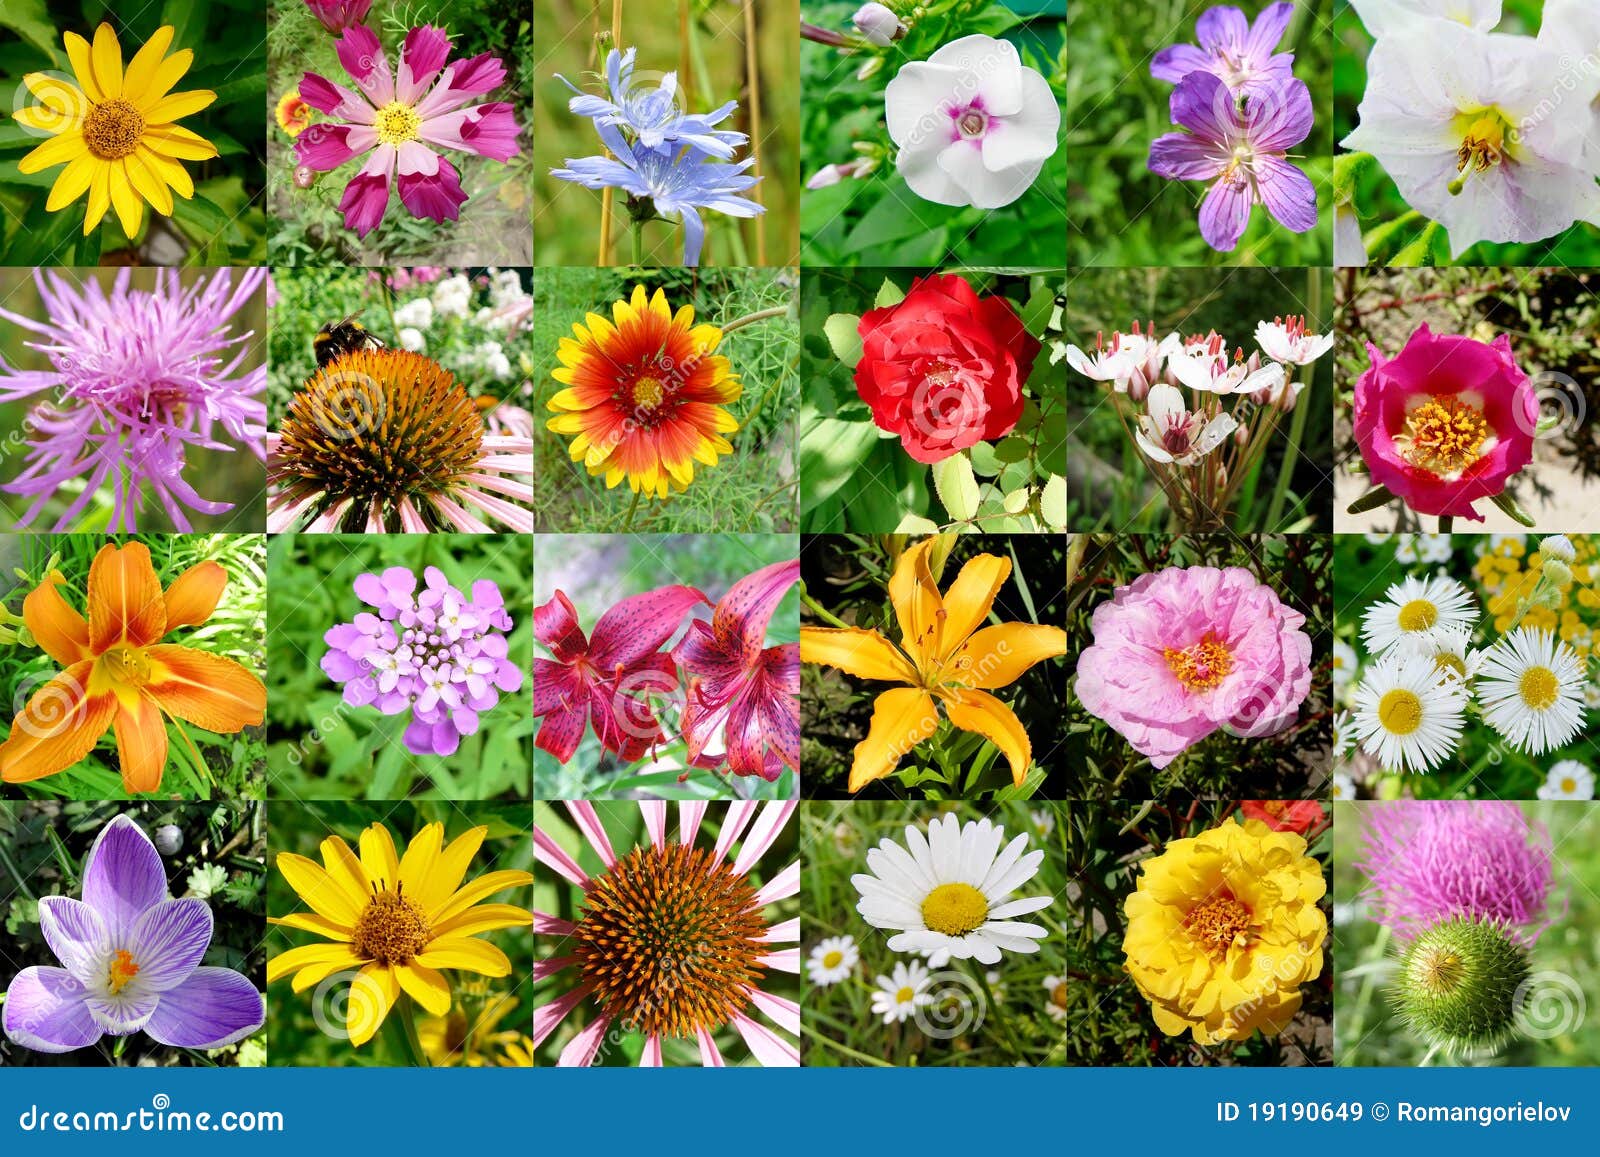 Collection of flowers stock image. Image of rose, blue - 19190649